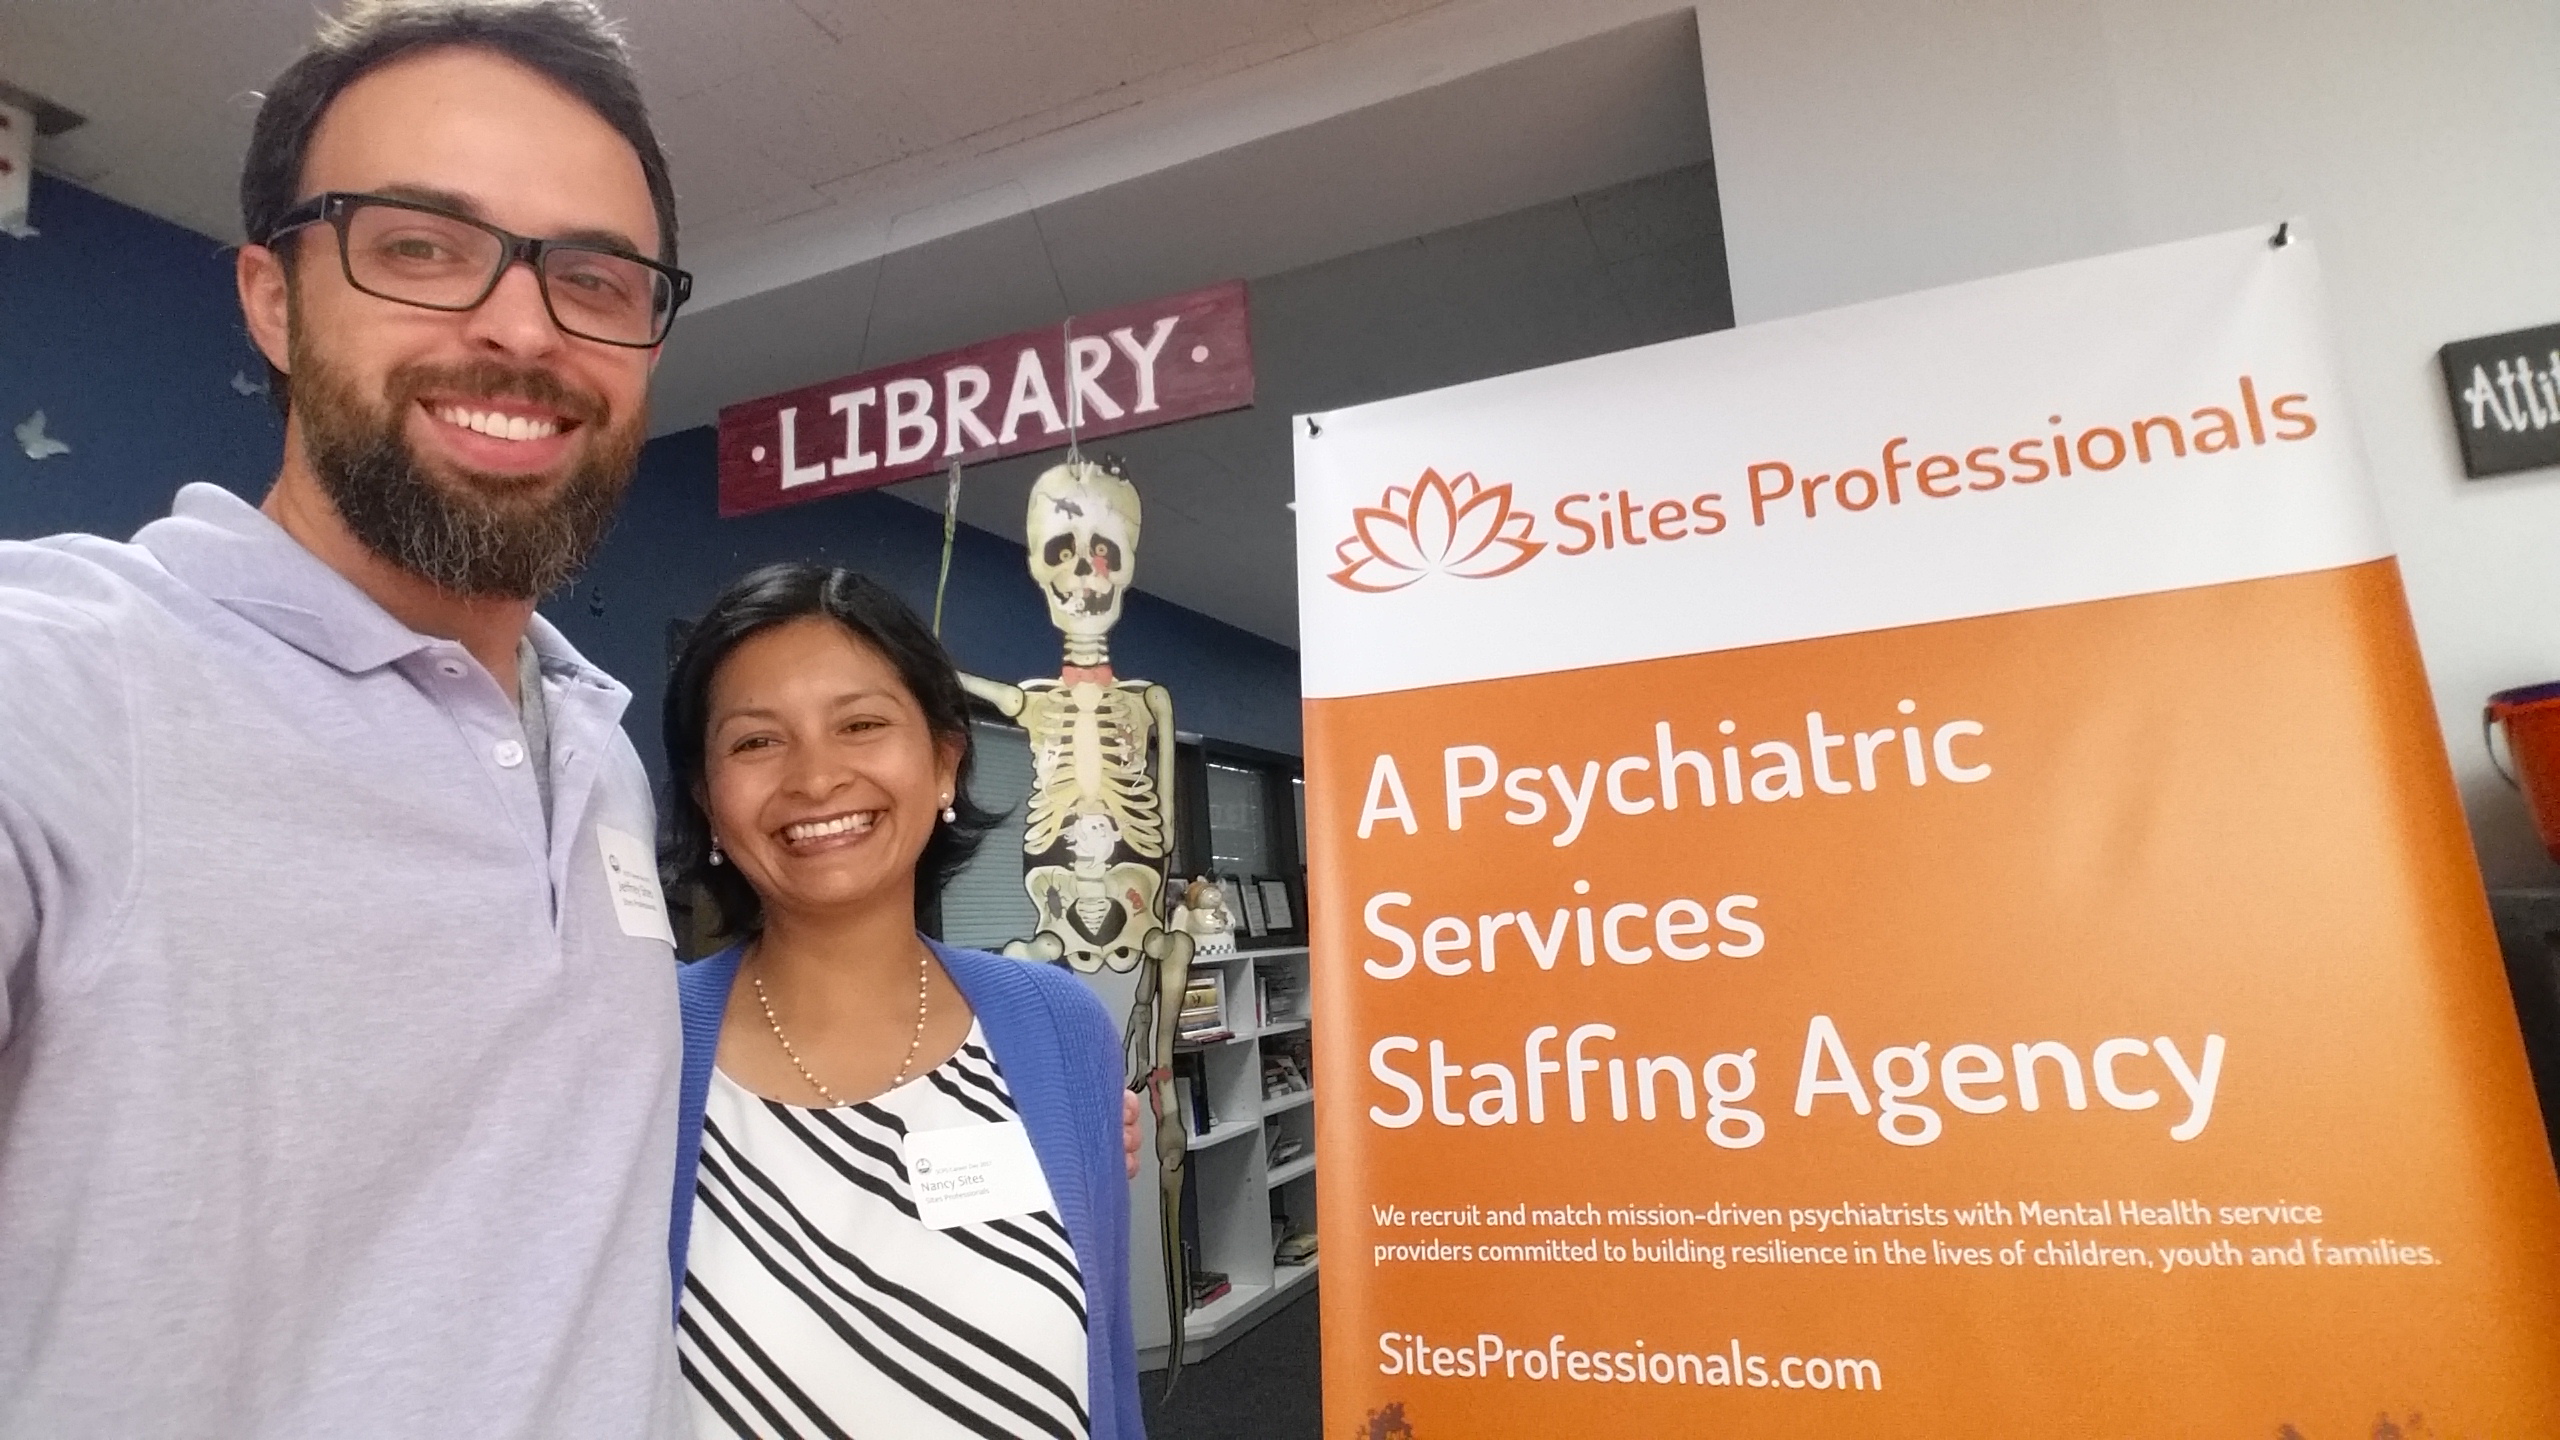 Sites Professionals at the Psychiatry Career Day